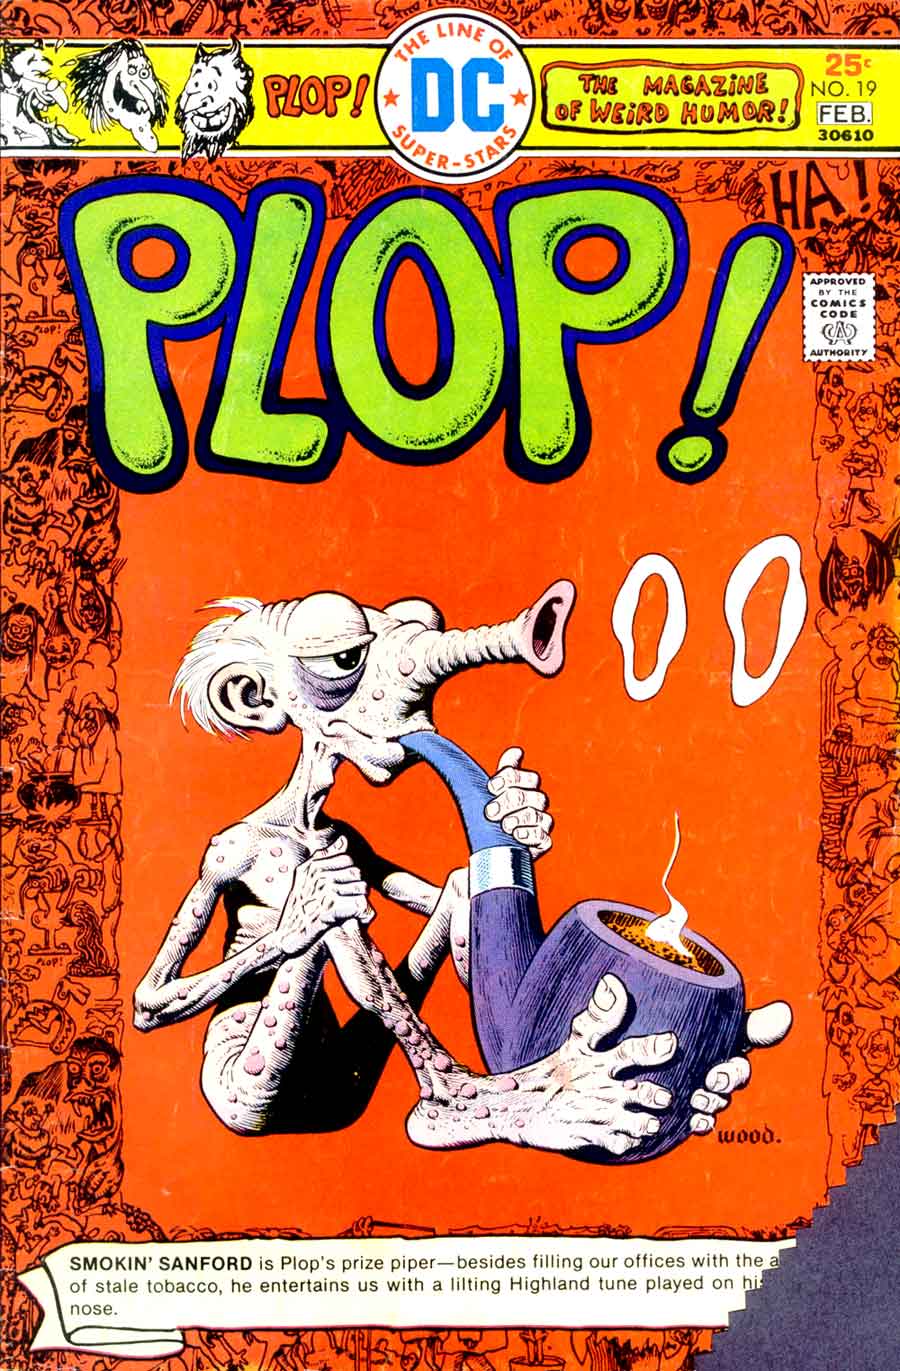 Plop v1 #19 dc 1970s bronze age comic book cover art by Wally Wood